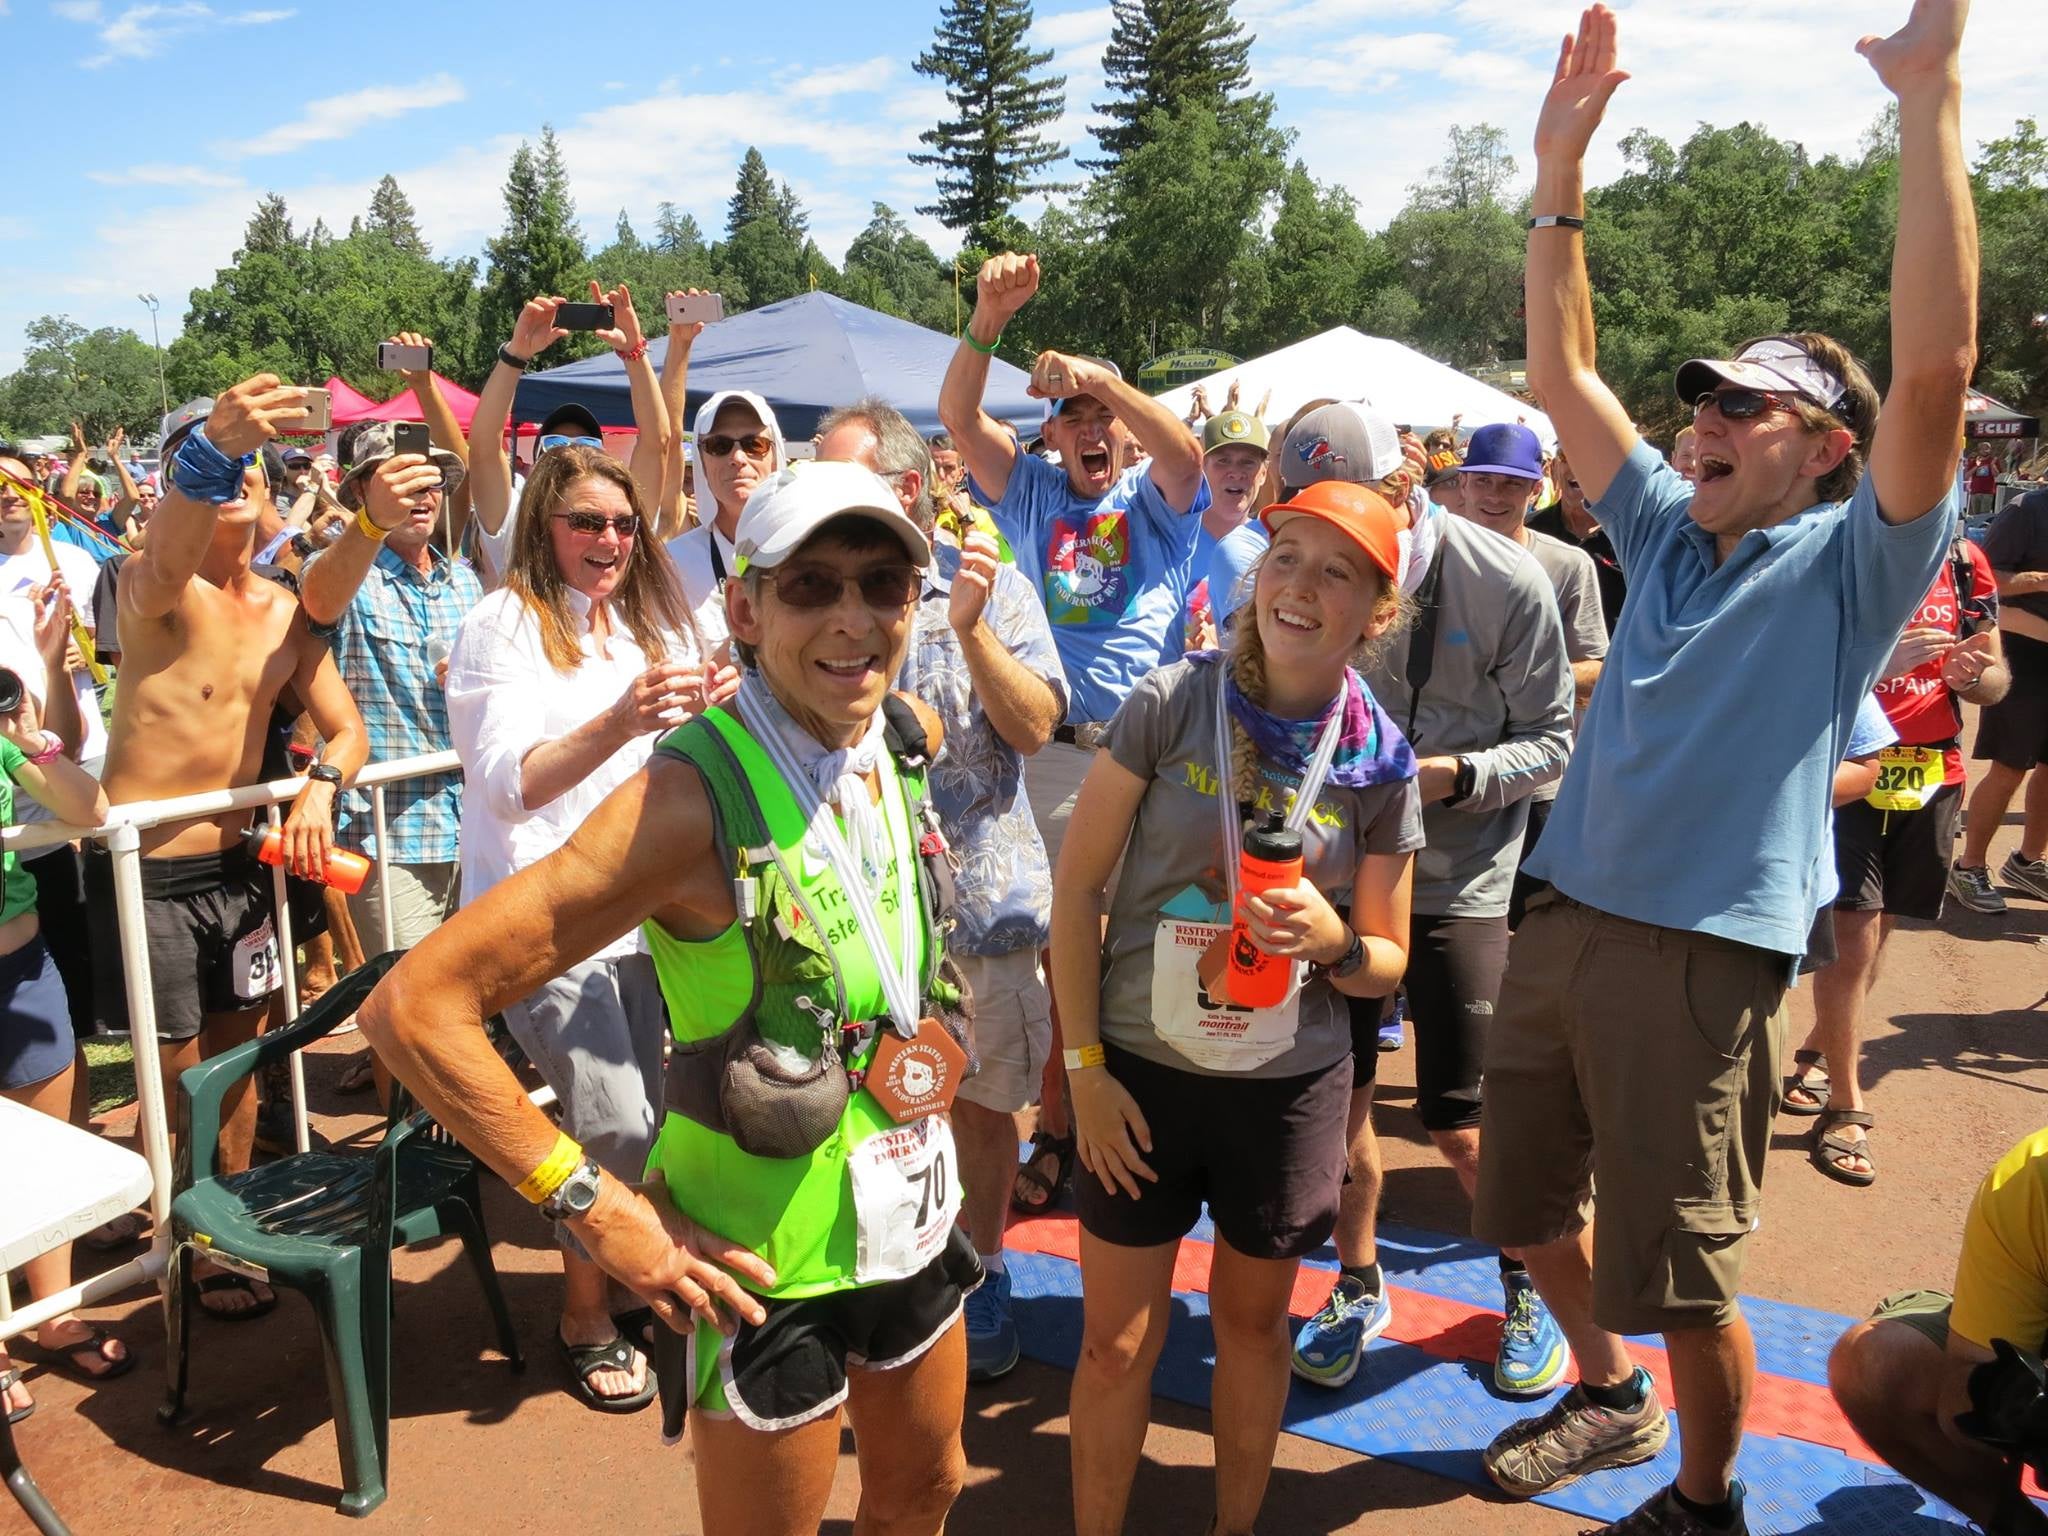 Gunhild Swanson at the finish line with her legion of fans